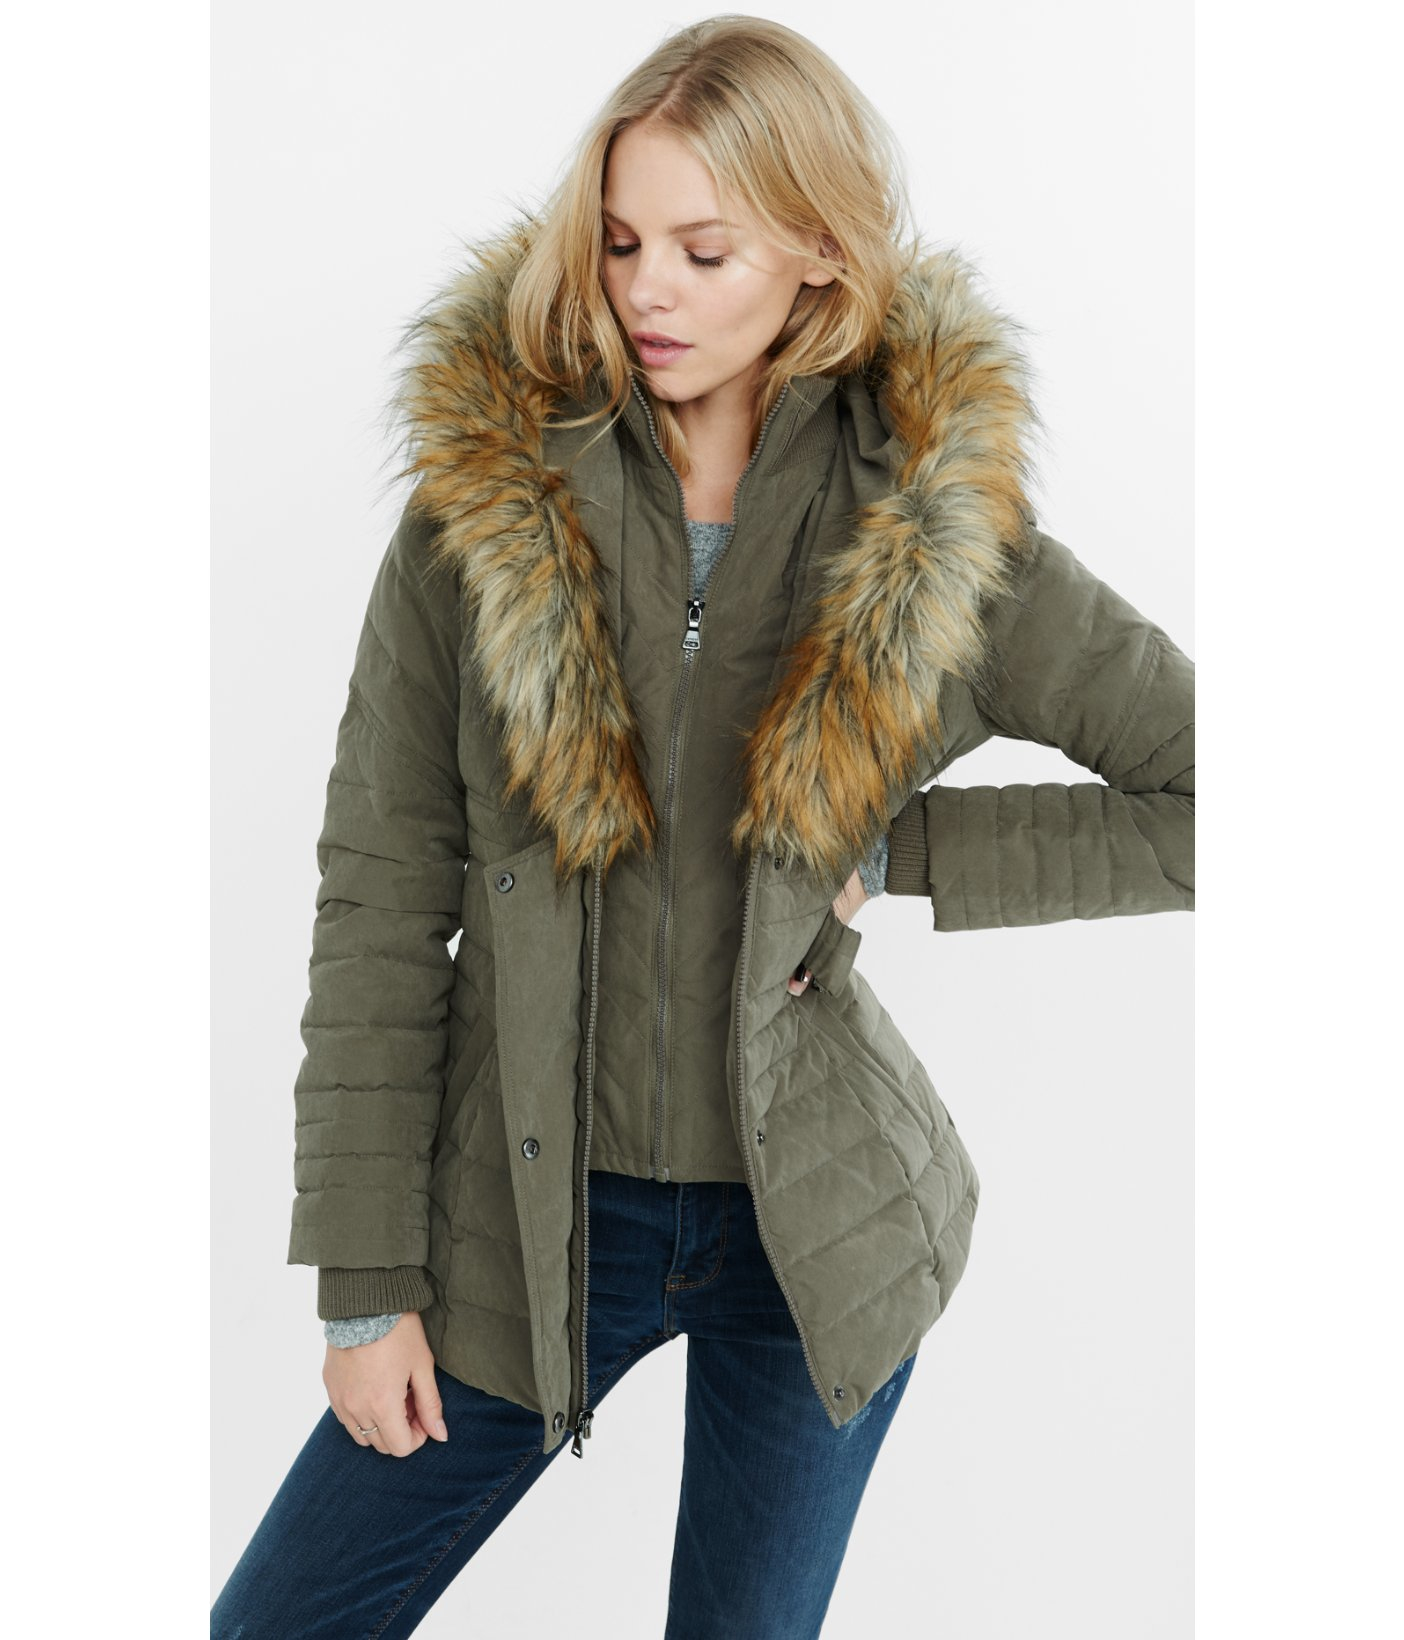 Lyst - Express Extreme Fur Hood Puffer Coat in Brown